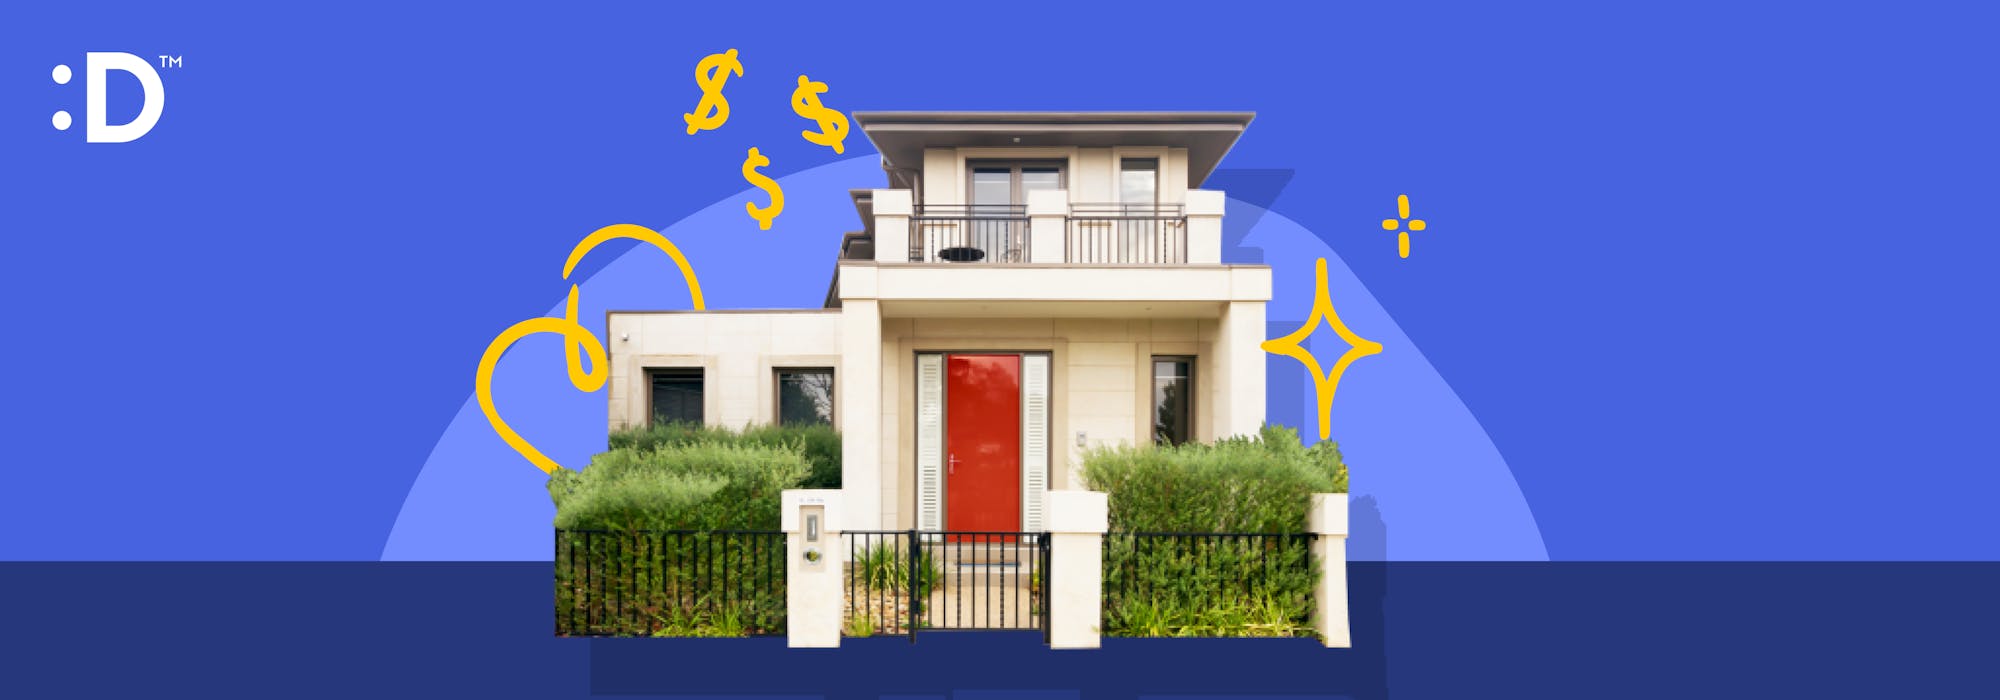 The Only Guide You'll Ever Need to Buying an Investment Property